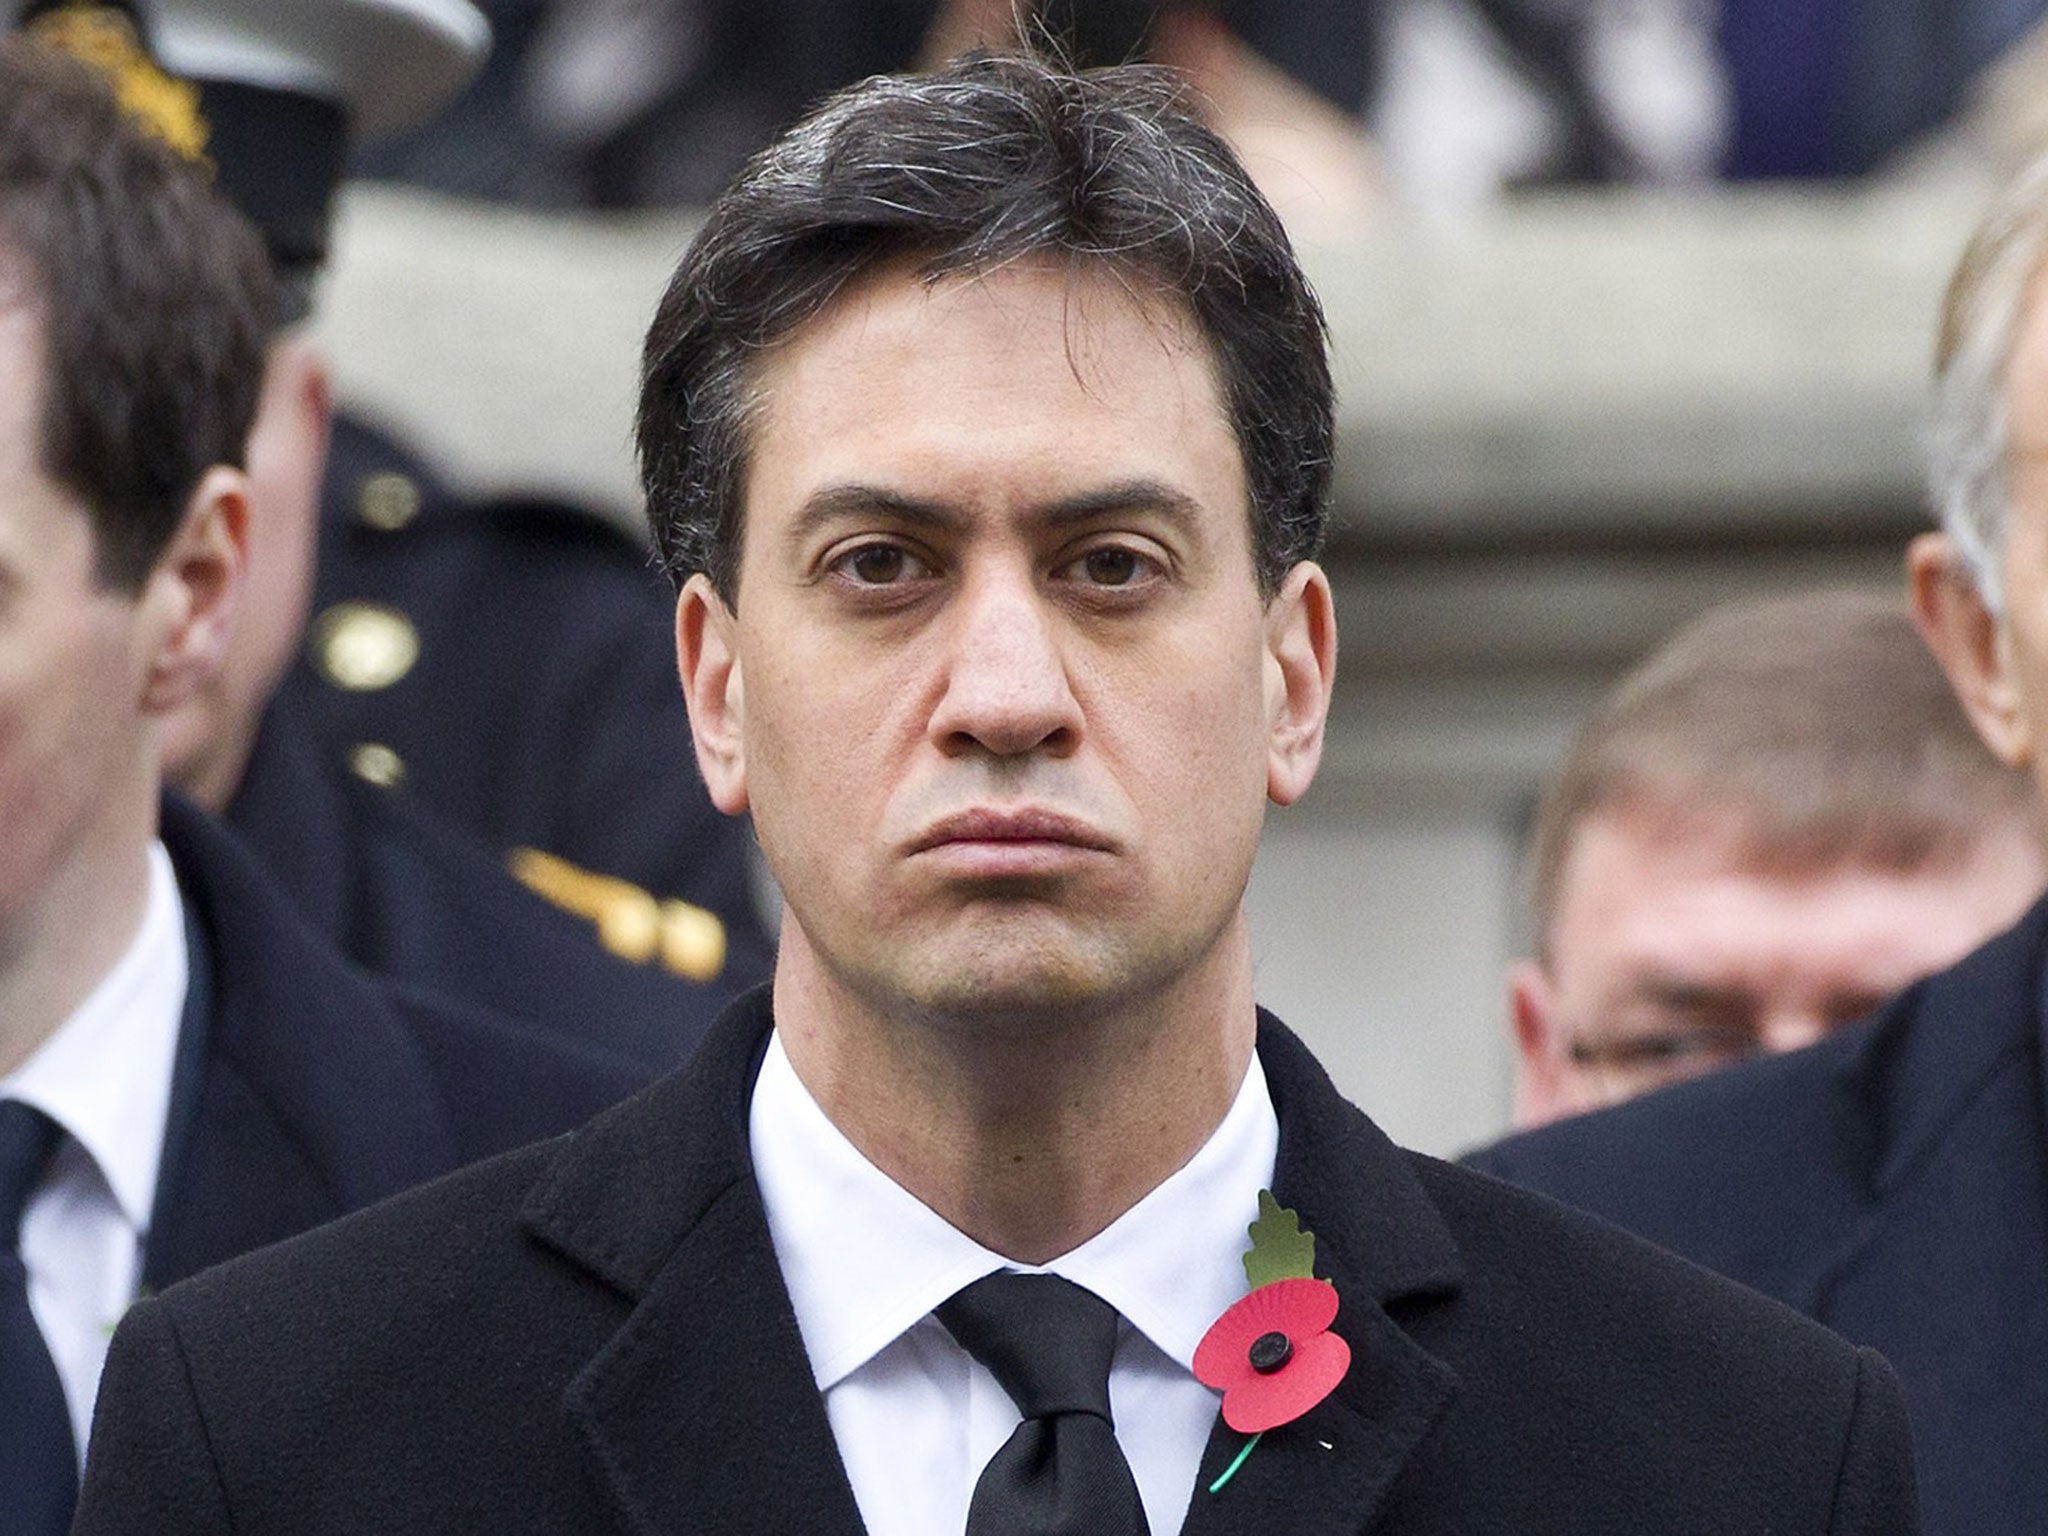 Only 34 per cent of Labour voters think Ed Miliband is up to the job of Prime Minister